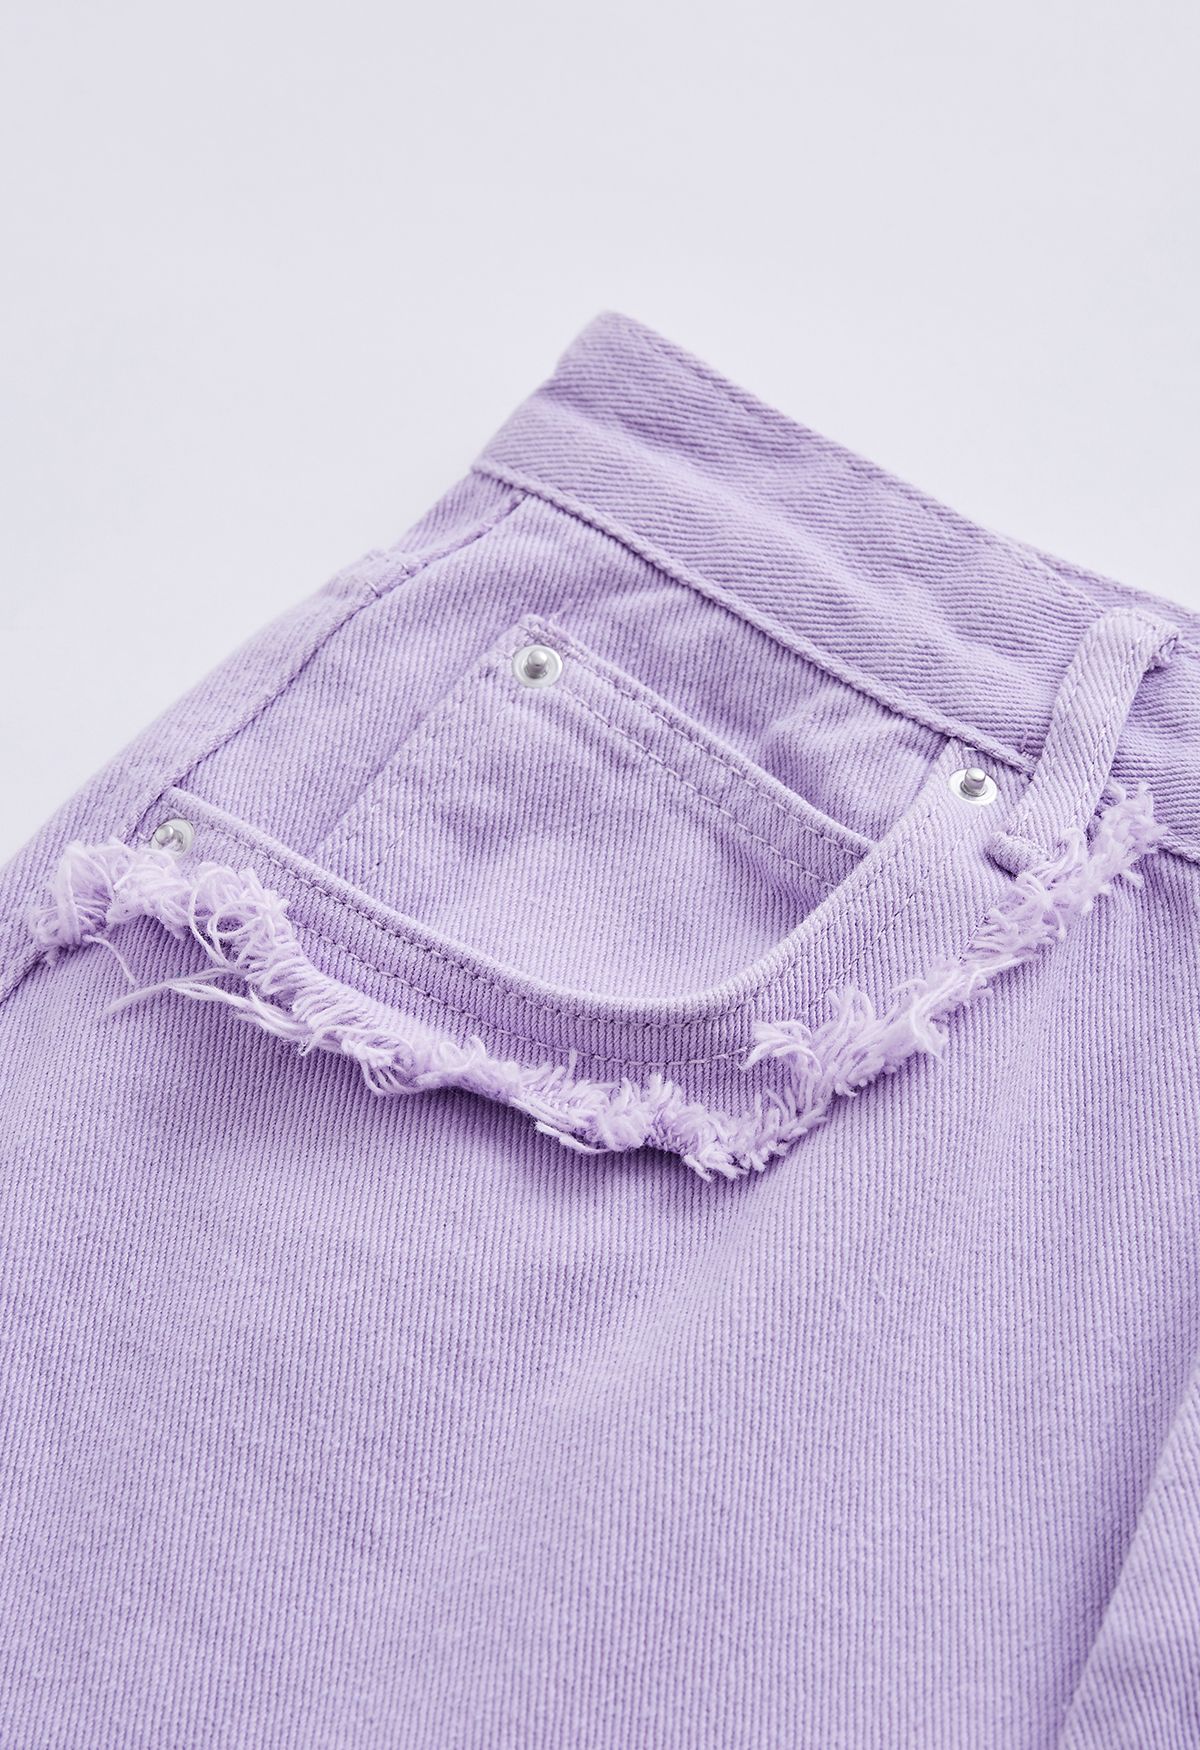 Classic Pocket Frayed Detail Flare Jeans in Lilac